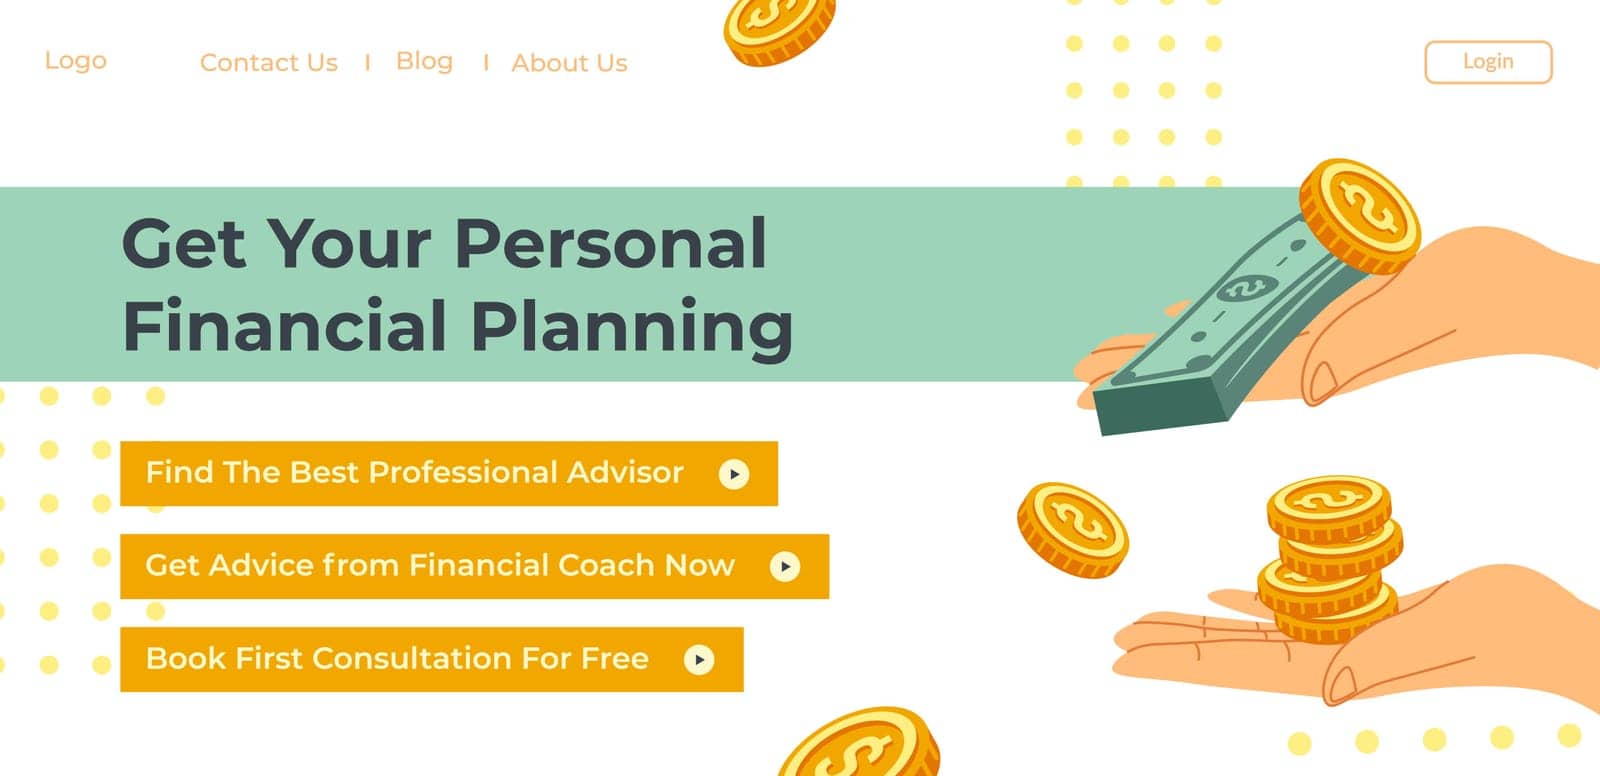 Find best professional advisor, get advice from expert, book first consultation. Personal financial planning application or service. Website landing page template, online site. Vector in flat style